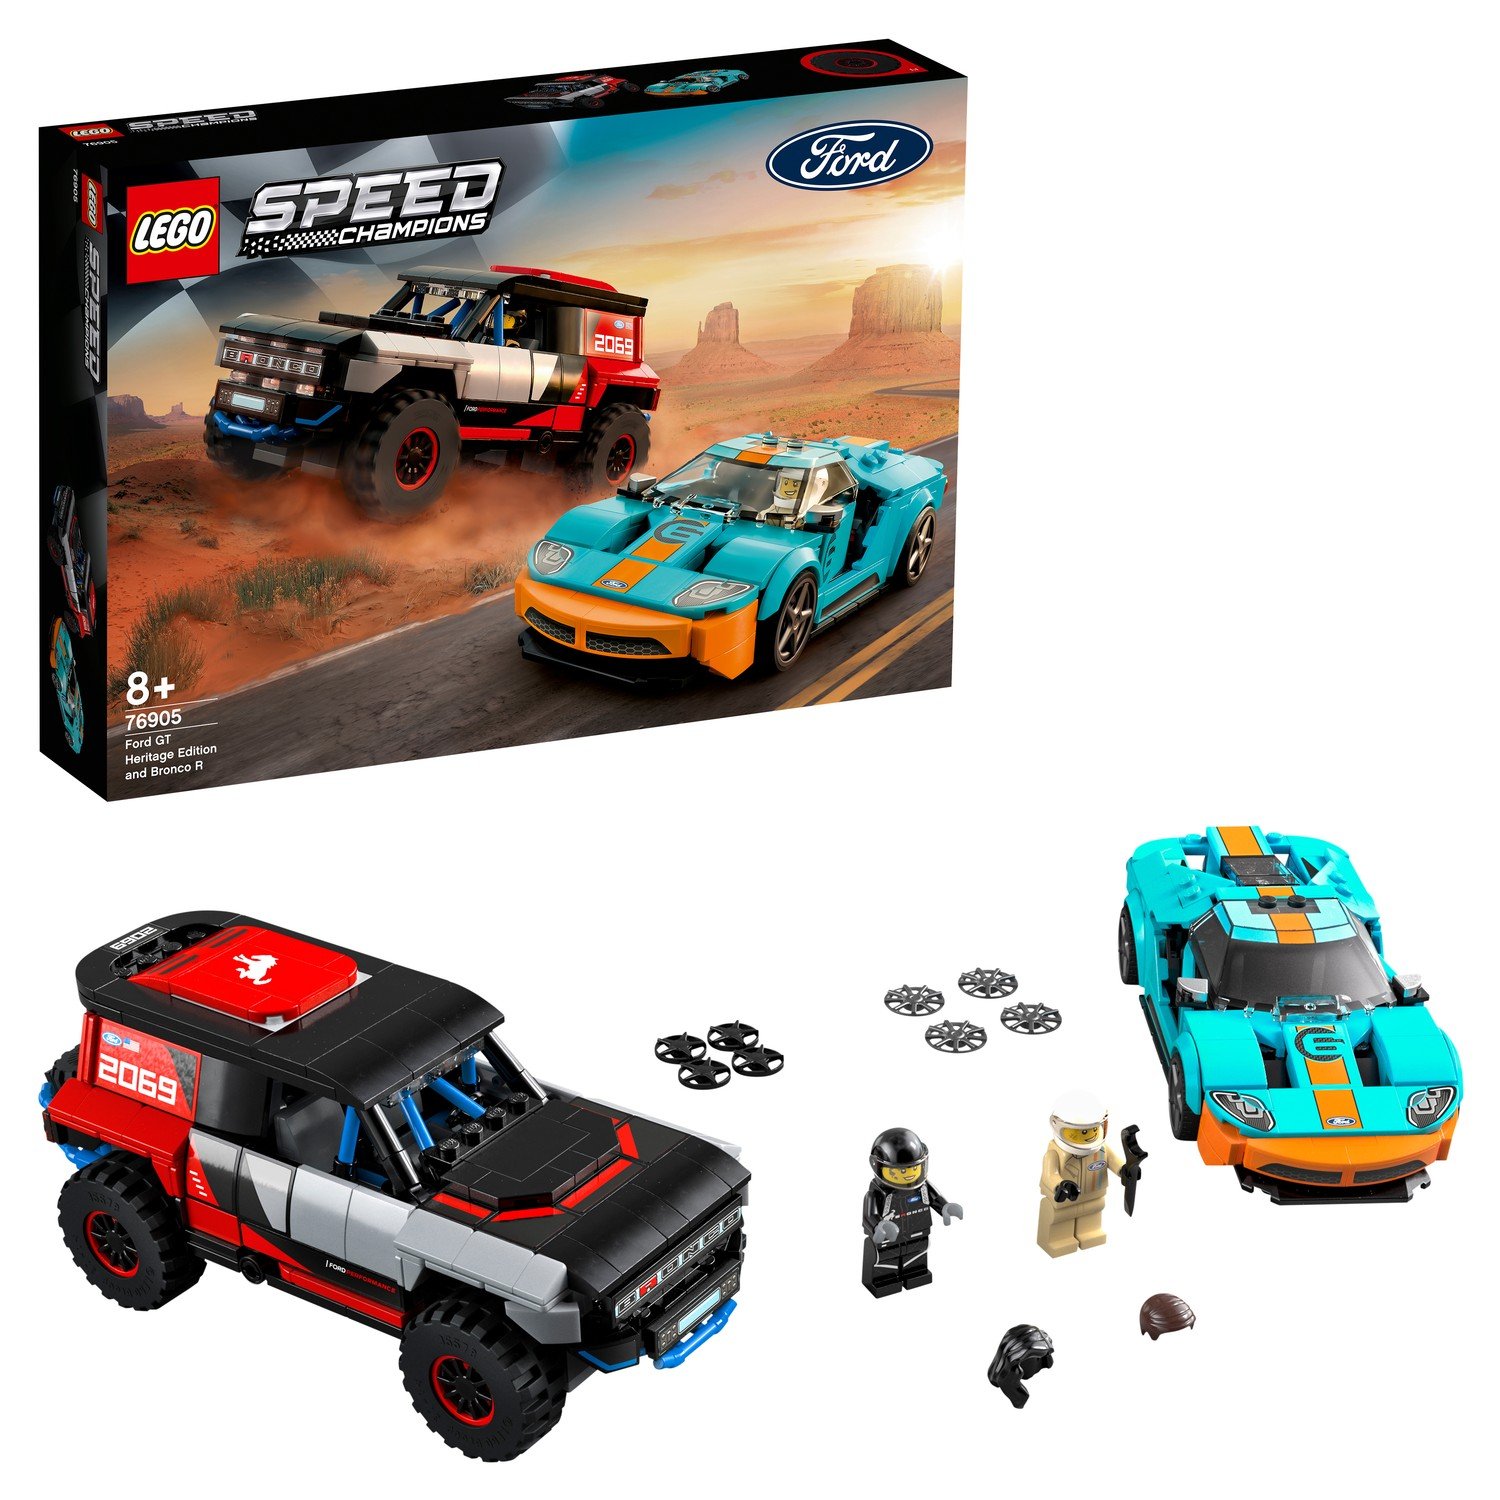 Конструктор LEGO Speed Champions 76905 Ford GT Heritage Edition and Bronco R